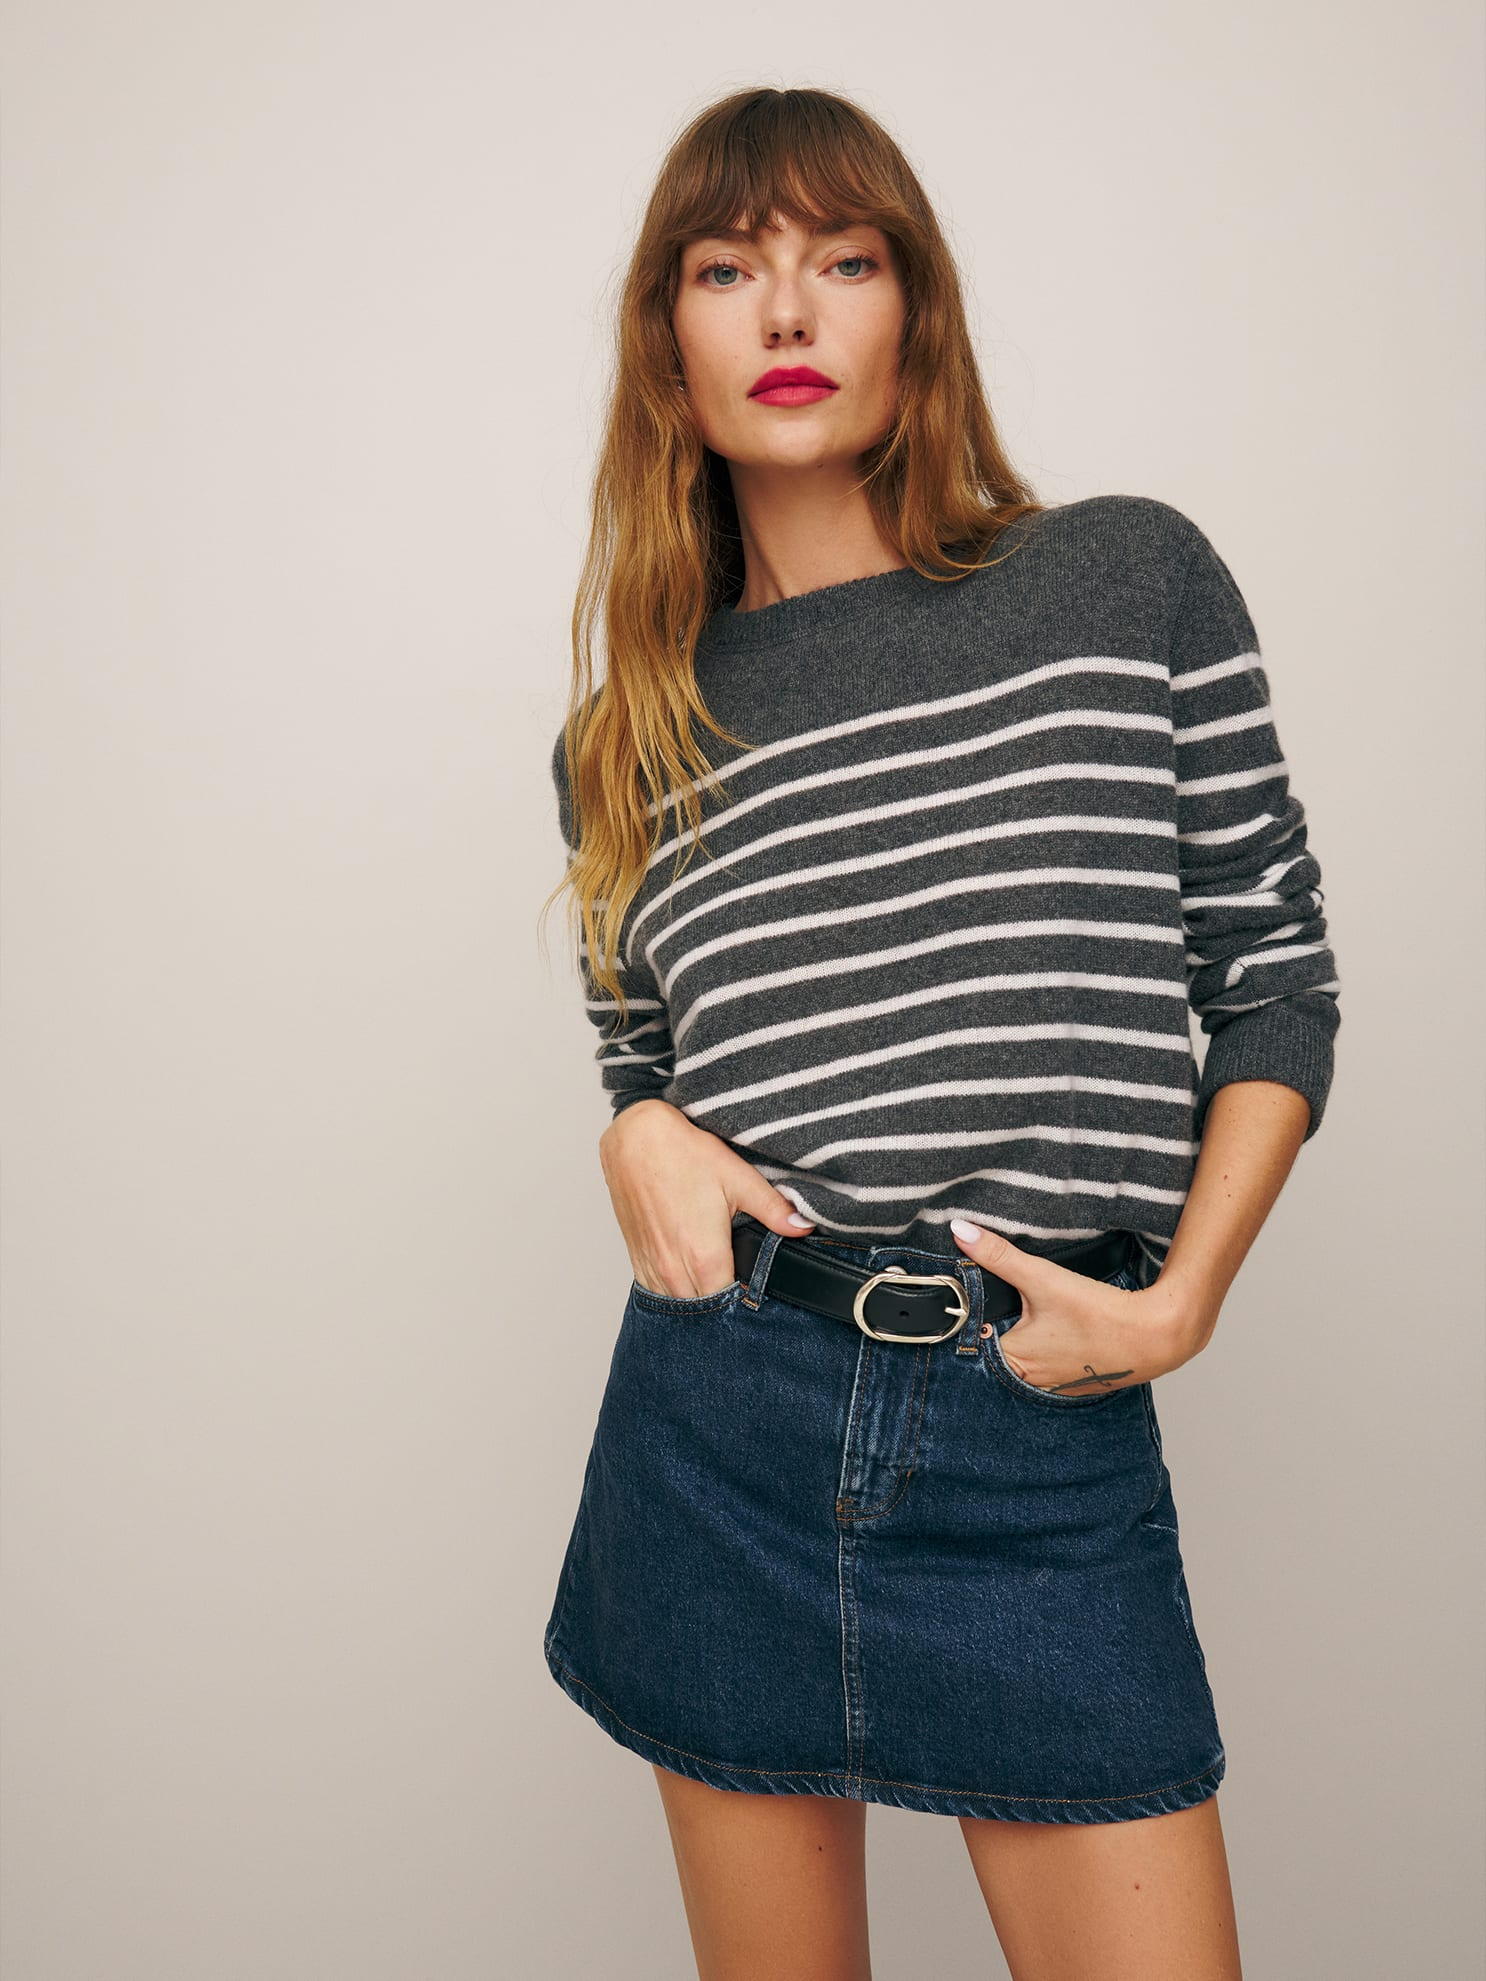 Woman in a striped sweater and denim skirt posing with one hand on her hip.